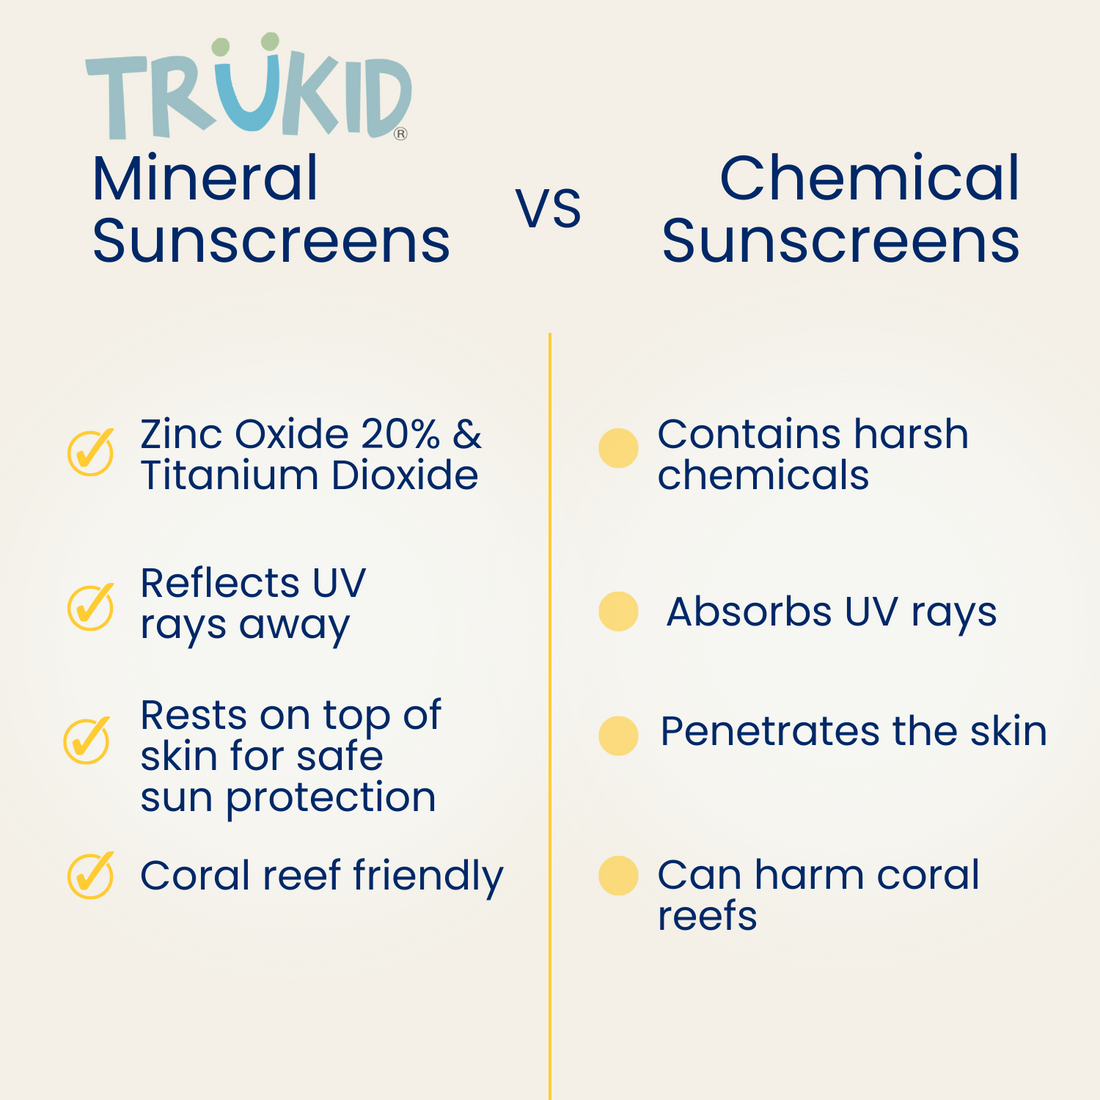 TruKid Eczema (Unscented) Daily SPF30 Sunscreen Mineral versus Chemical